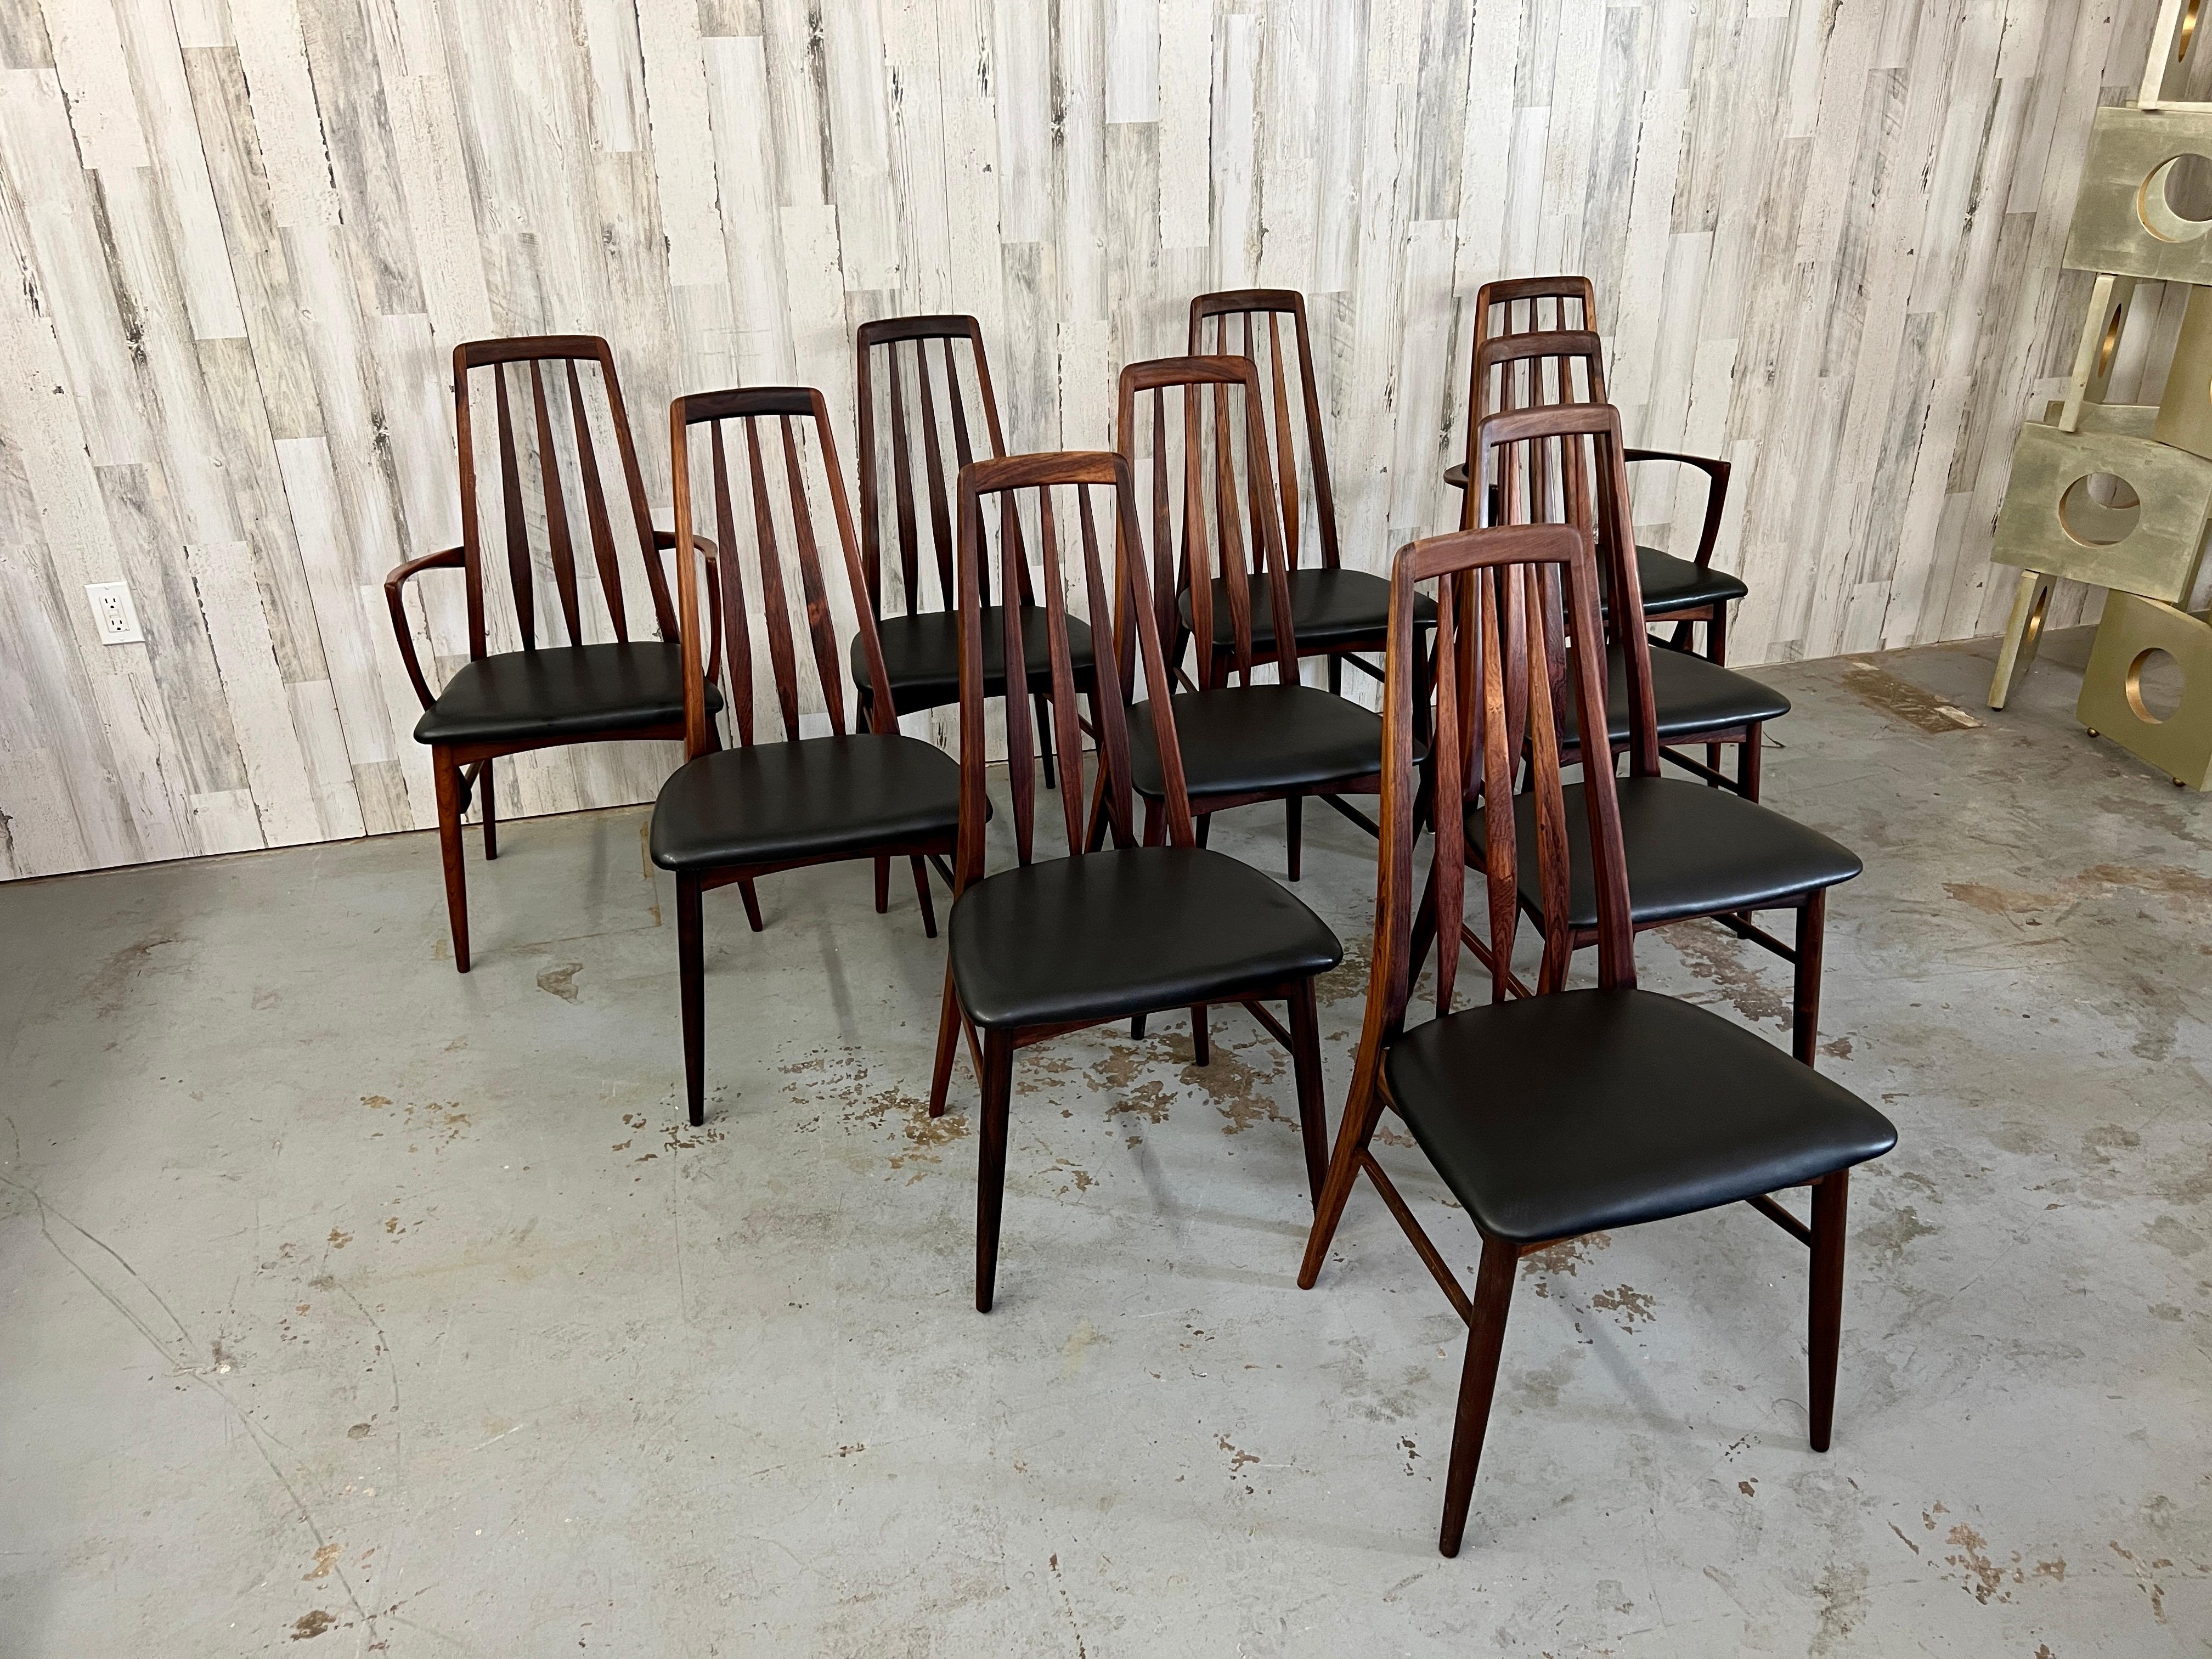 Rare set of ten solid rosewood dining chairs designed by Niels Korfoed The Eva chair set is comprised of 8 side chairs and two arm chairs some have newer vinyl seats but match well.
2 arm chairs chairs measure 20.3/4s deep by 20.3/8s wide 37.5/8s